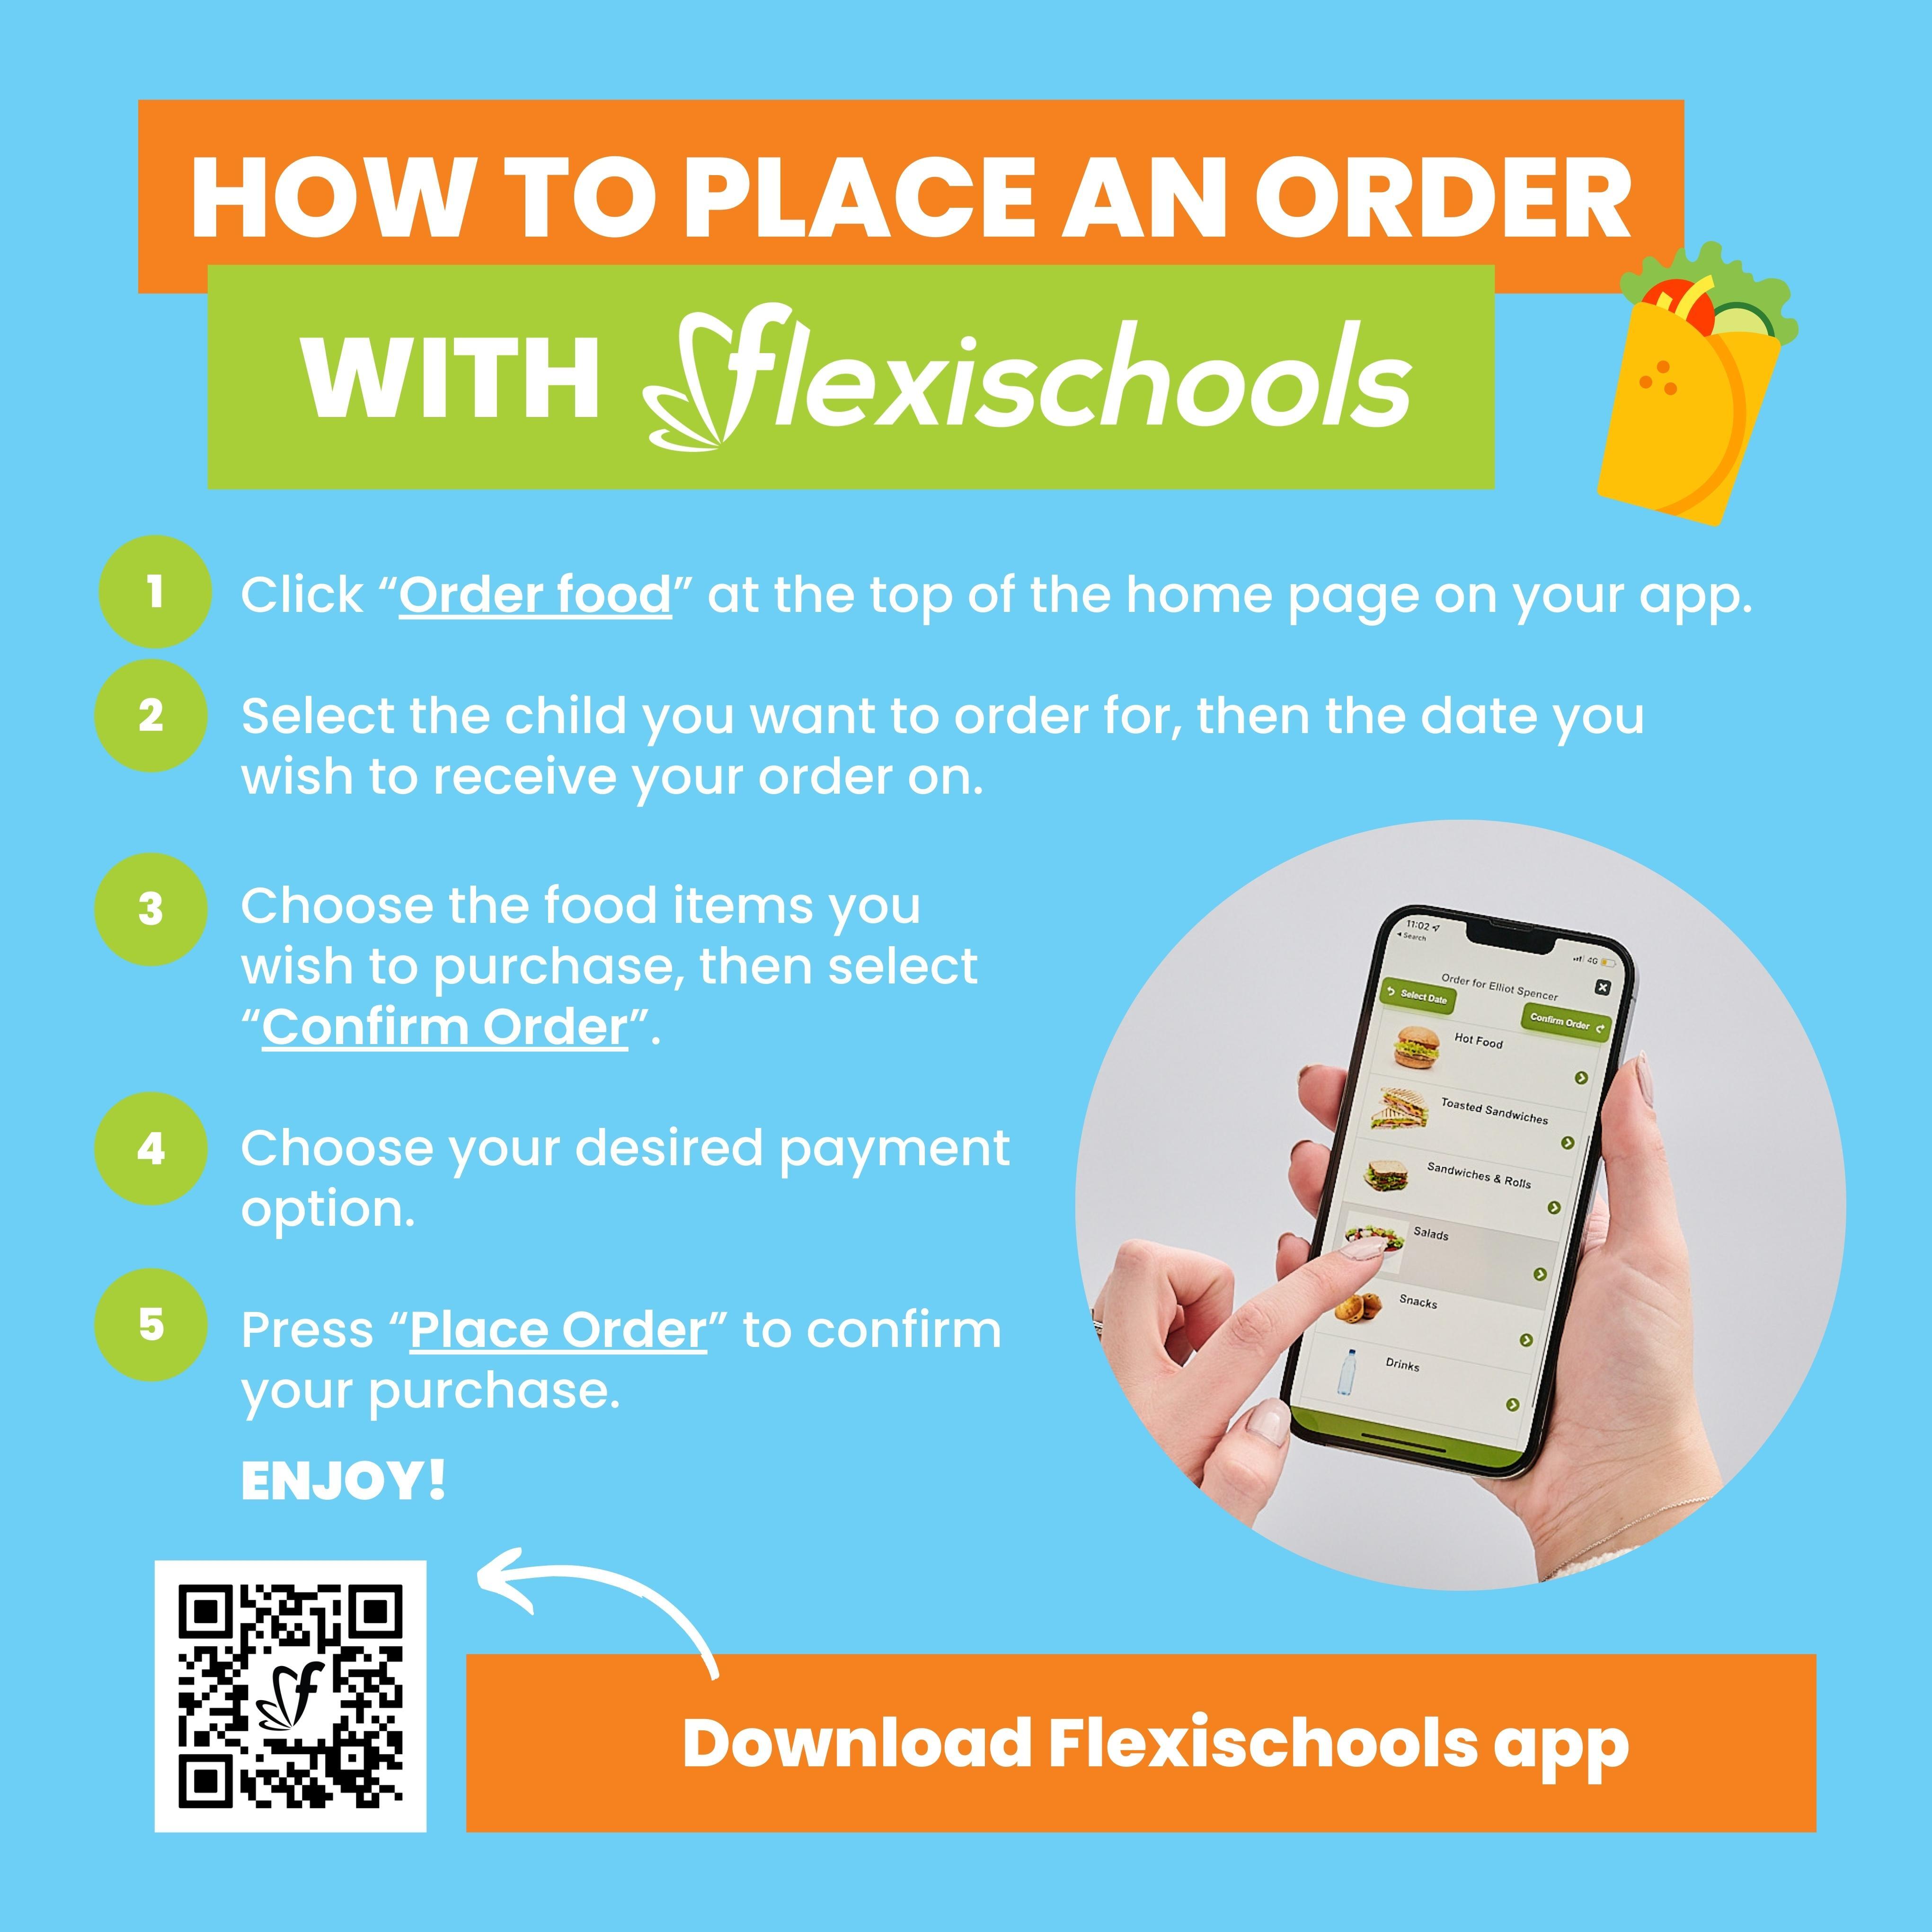 Flexischools - How to place an order 